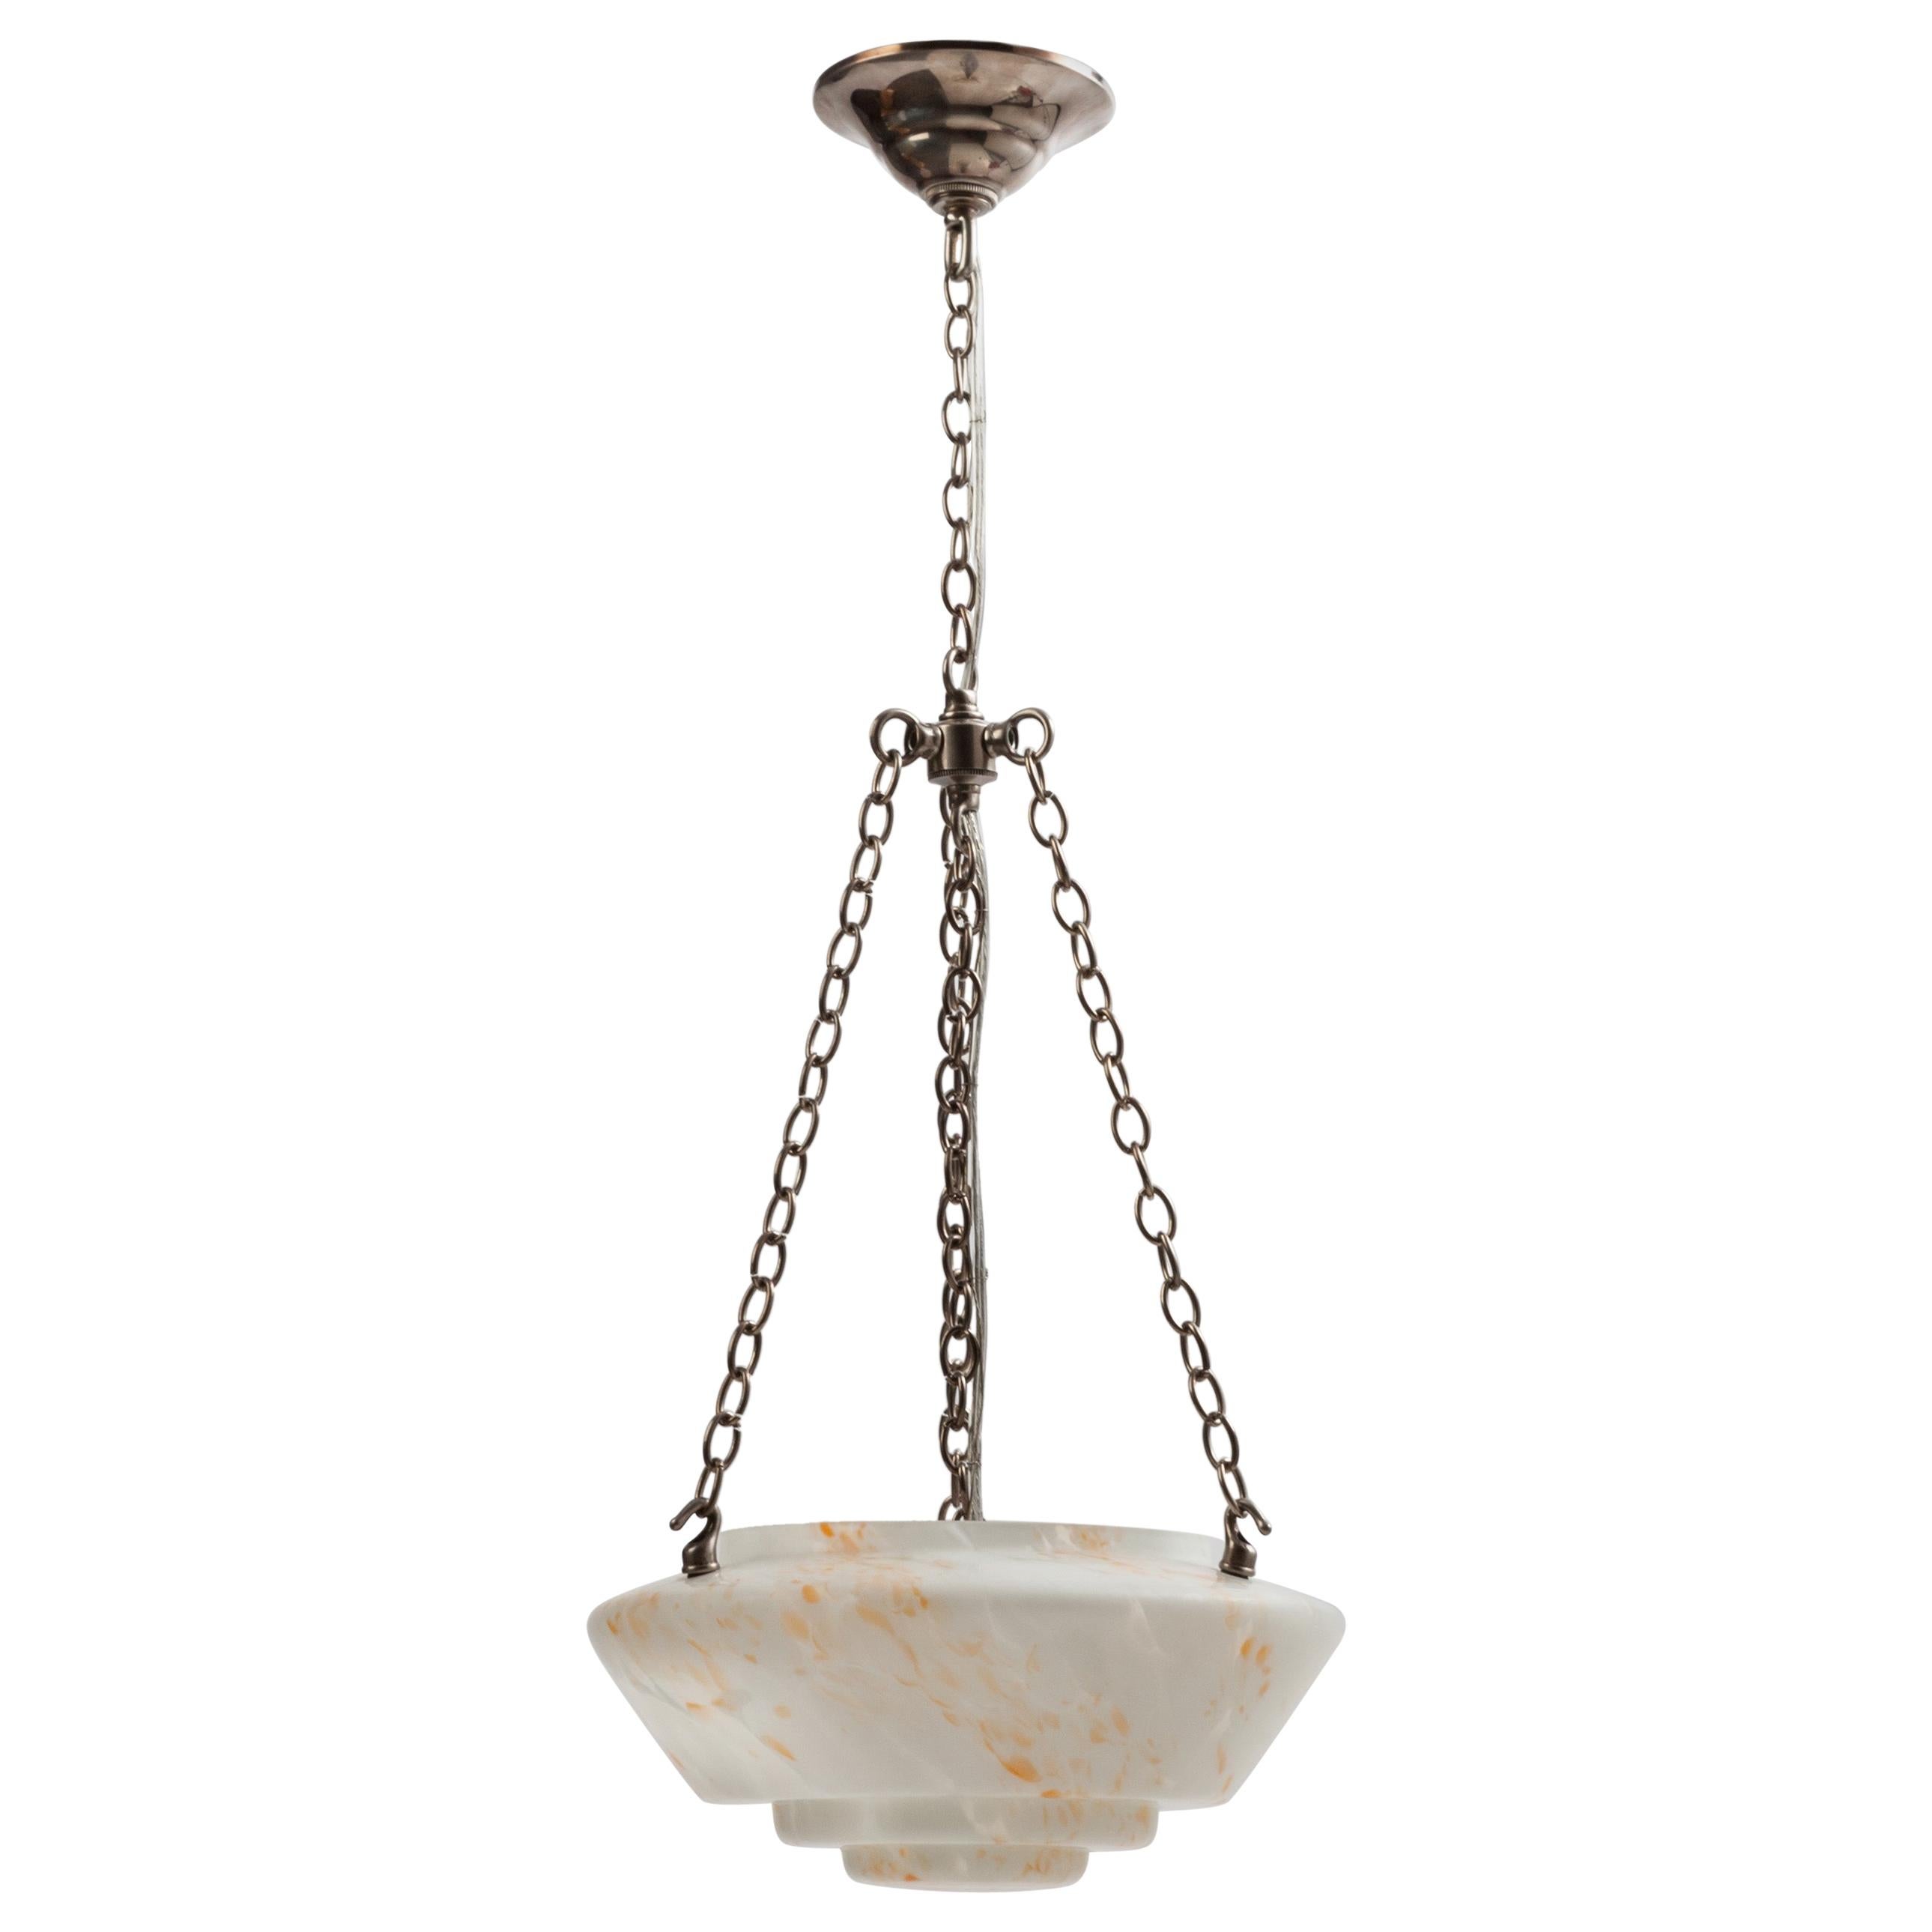 Mid-Century Modern End-Of-Day Art Glass and Nickel Pendant Light, Circa 1950s For Sale